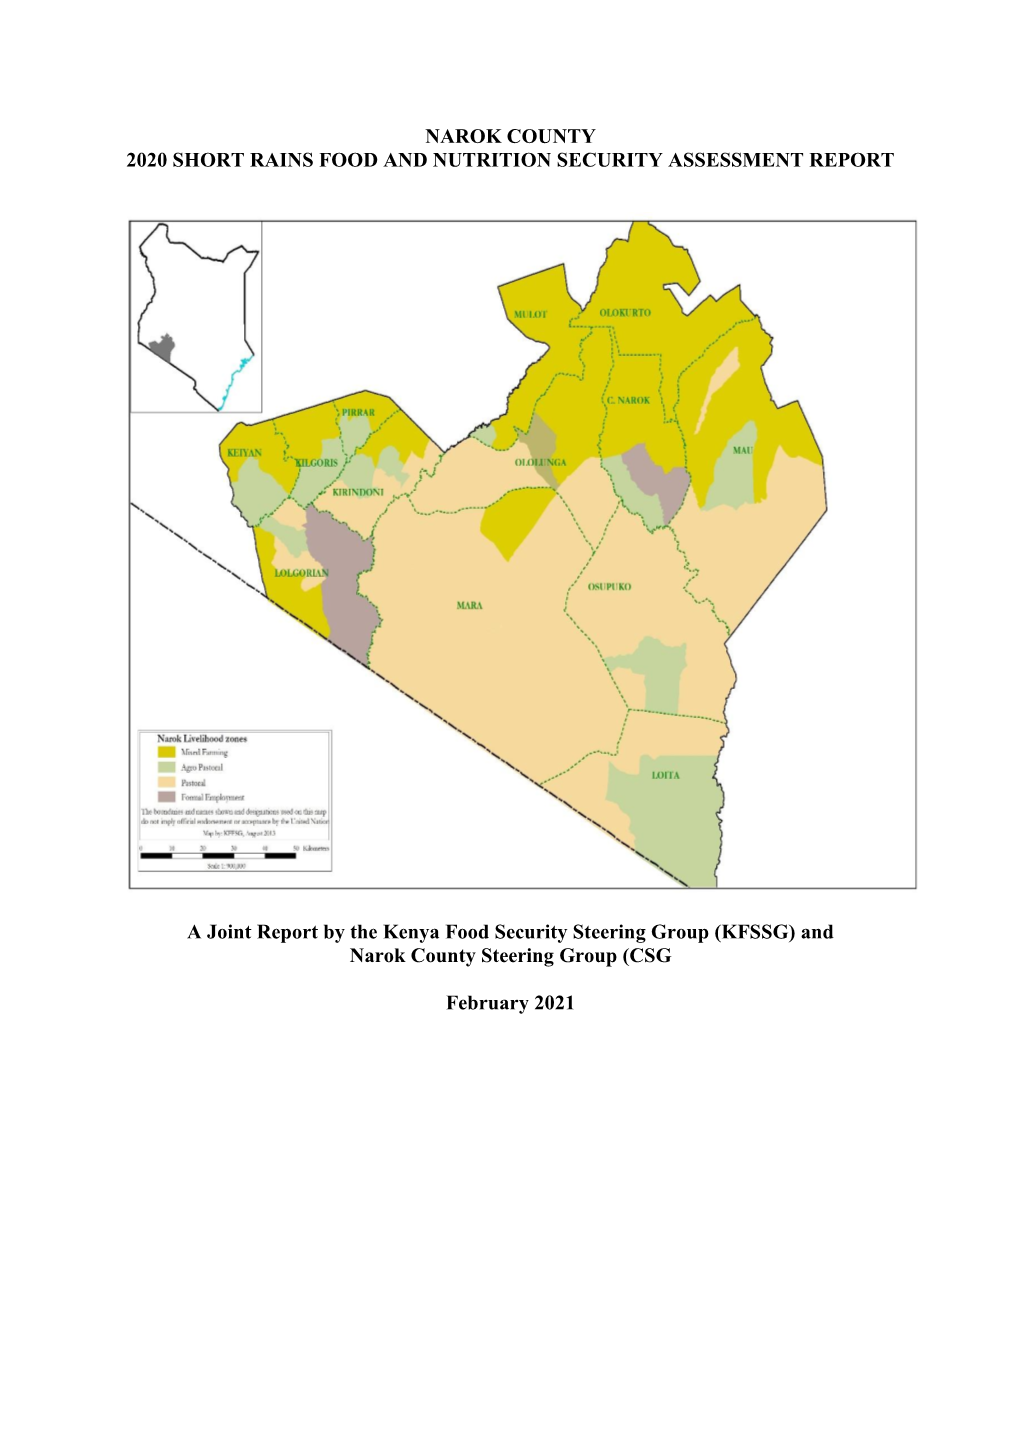 Narok County 2020 Short Rains Food and Nutrition Security Assessment Report